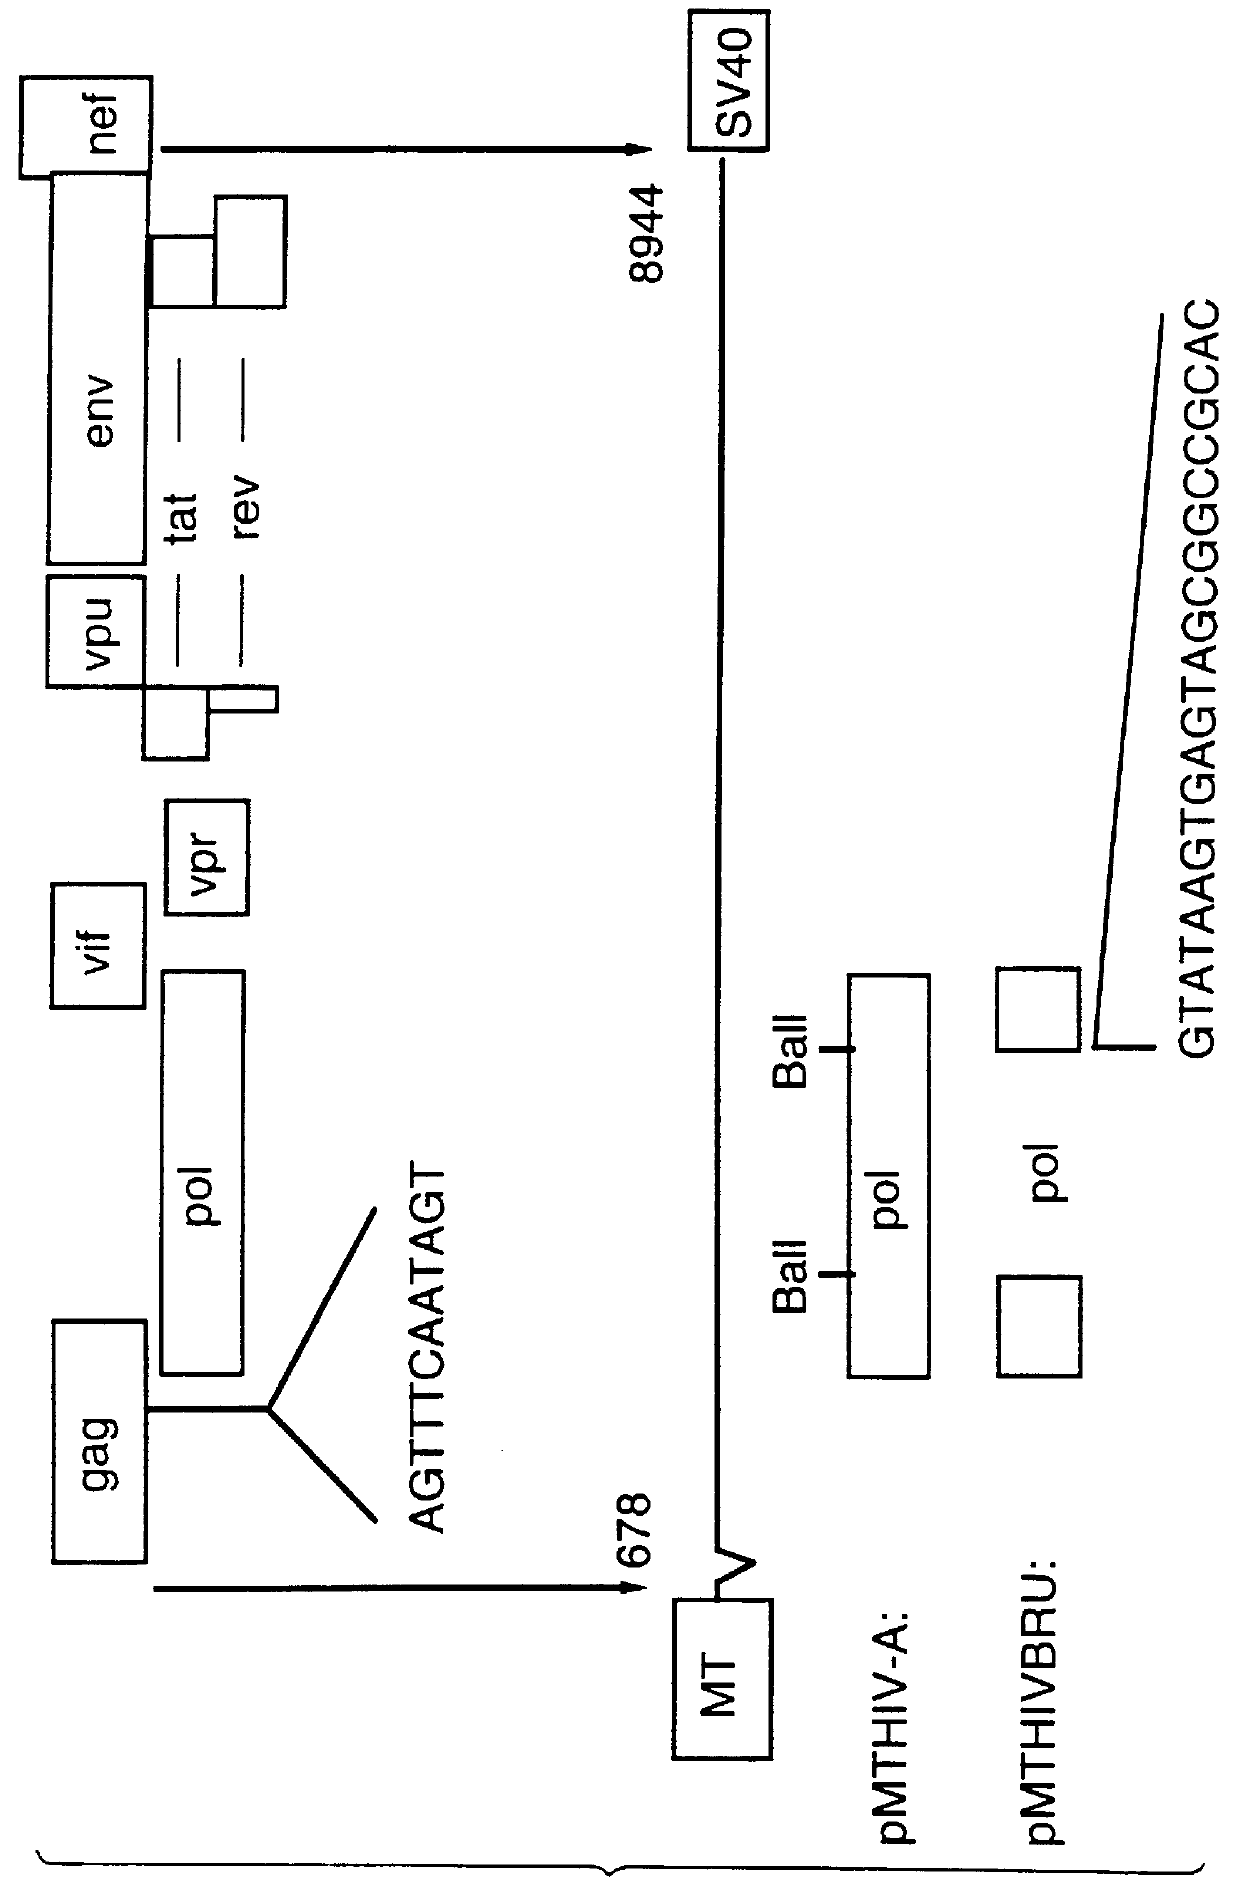 Methods for the detection of HIV-specific immune responses employing non-infectious, non-replicating, HIV retrovirus-like particles containing heterologous antigenic markers